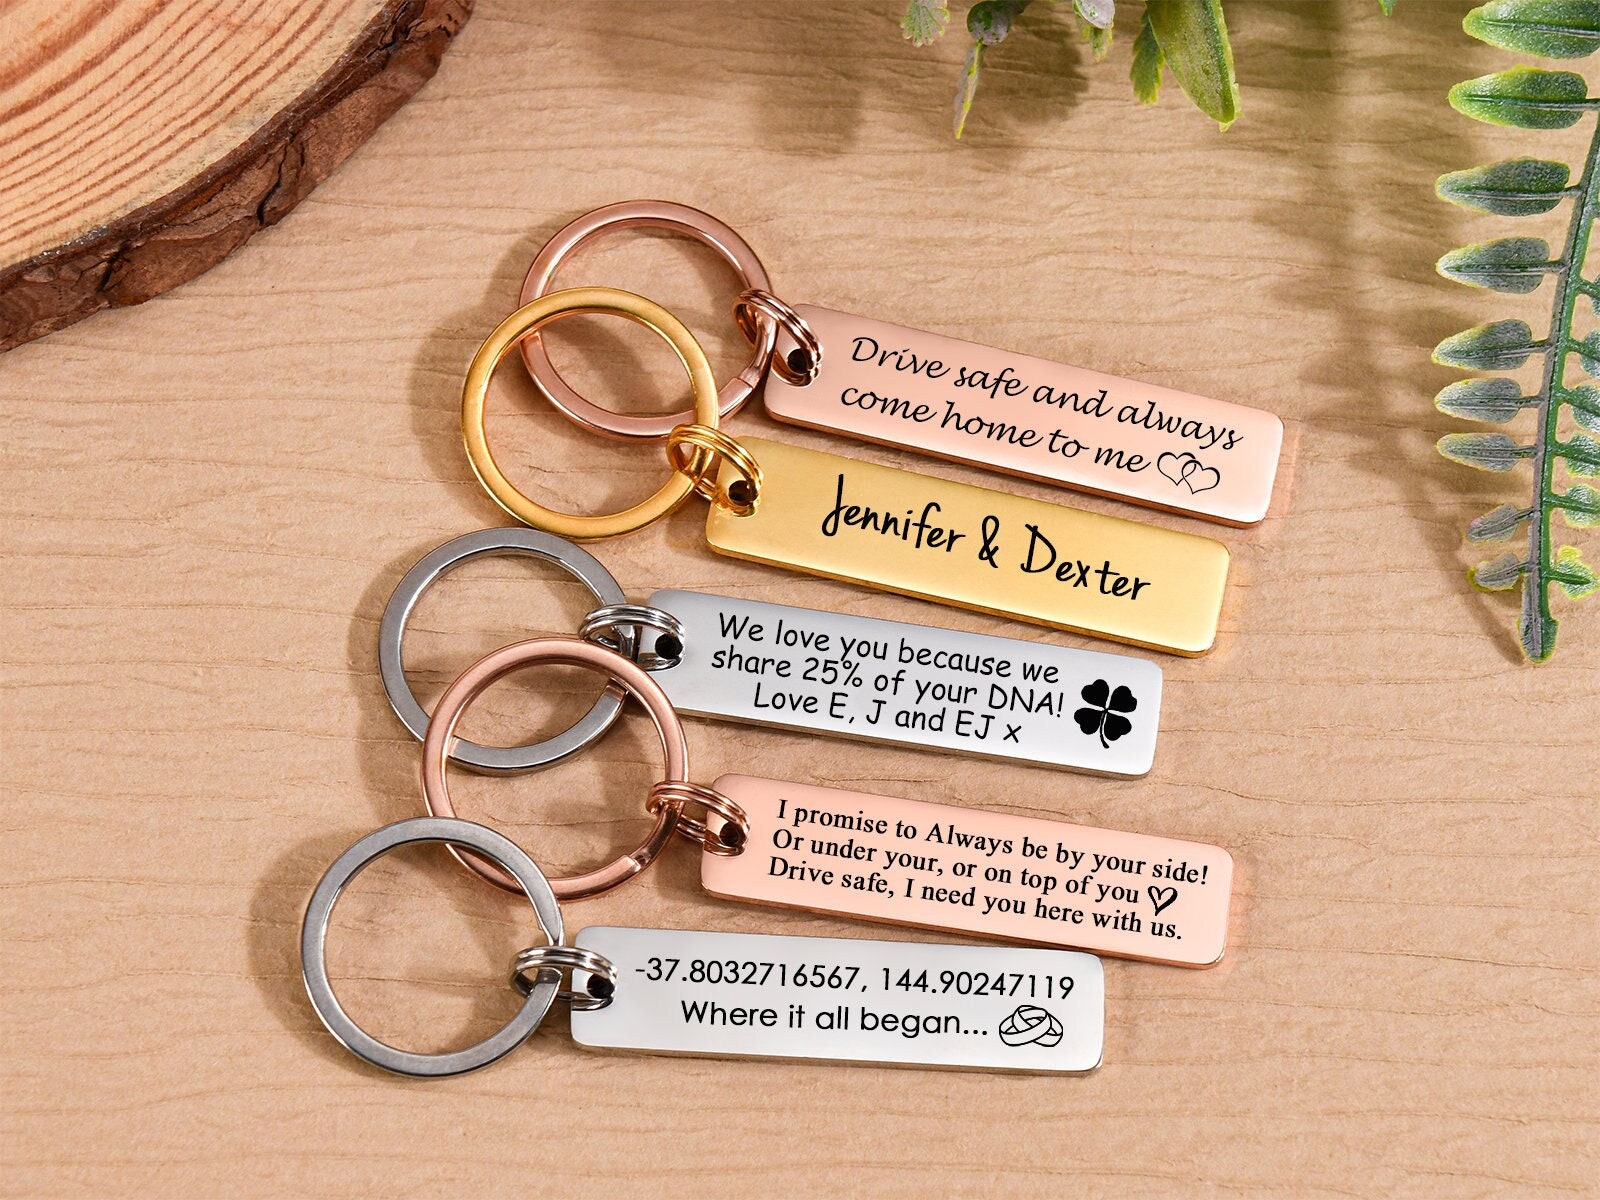 Drive Safe I Need You Here With Me Key Ring Creative Keychain Car Key